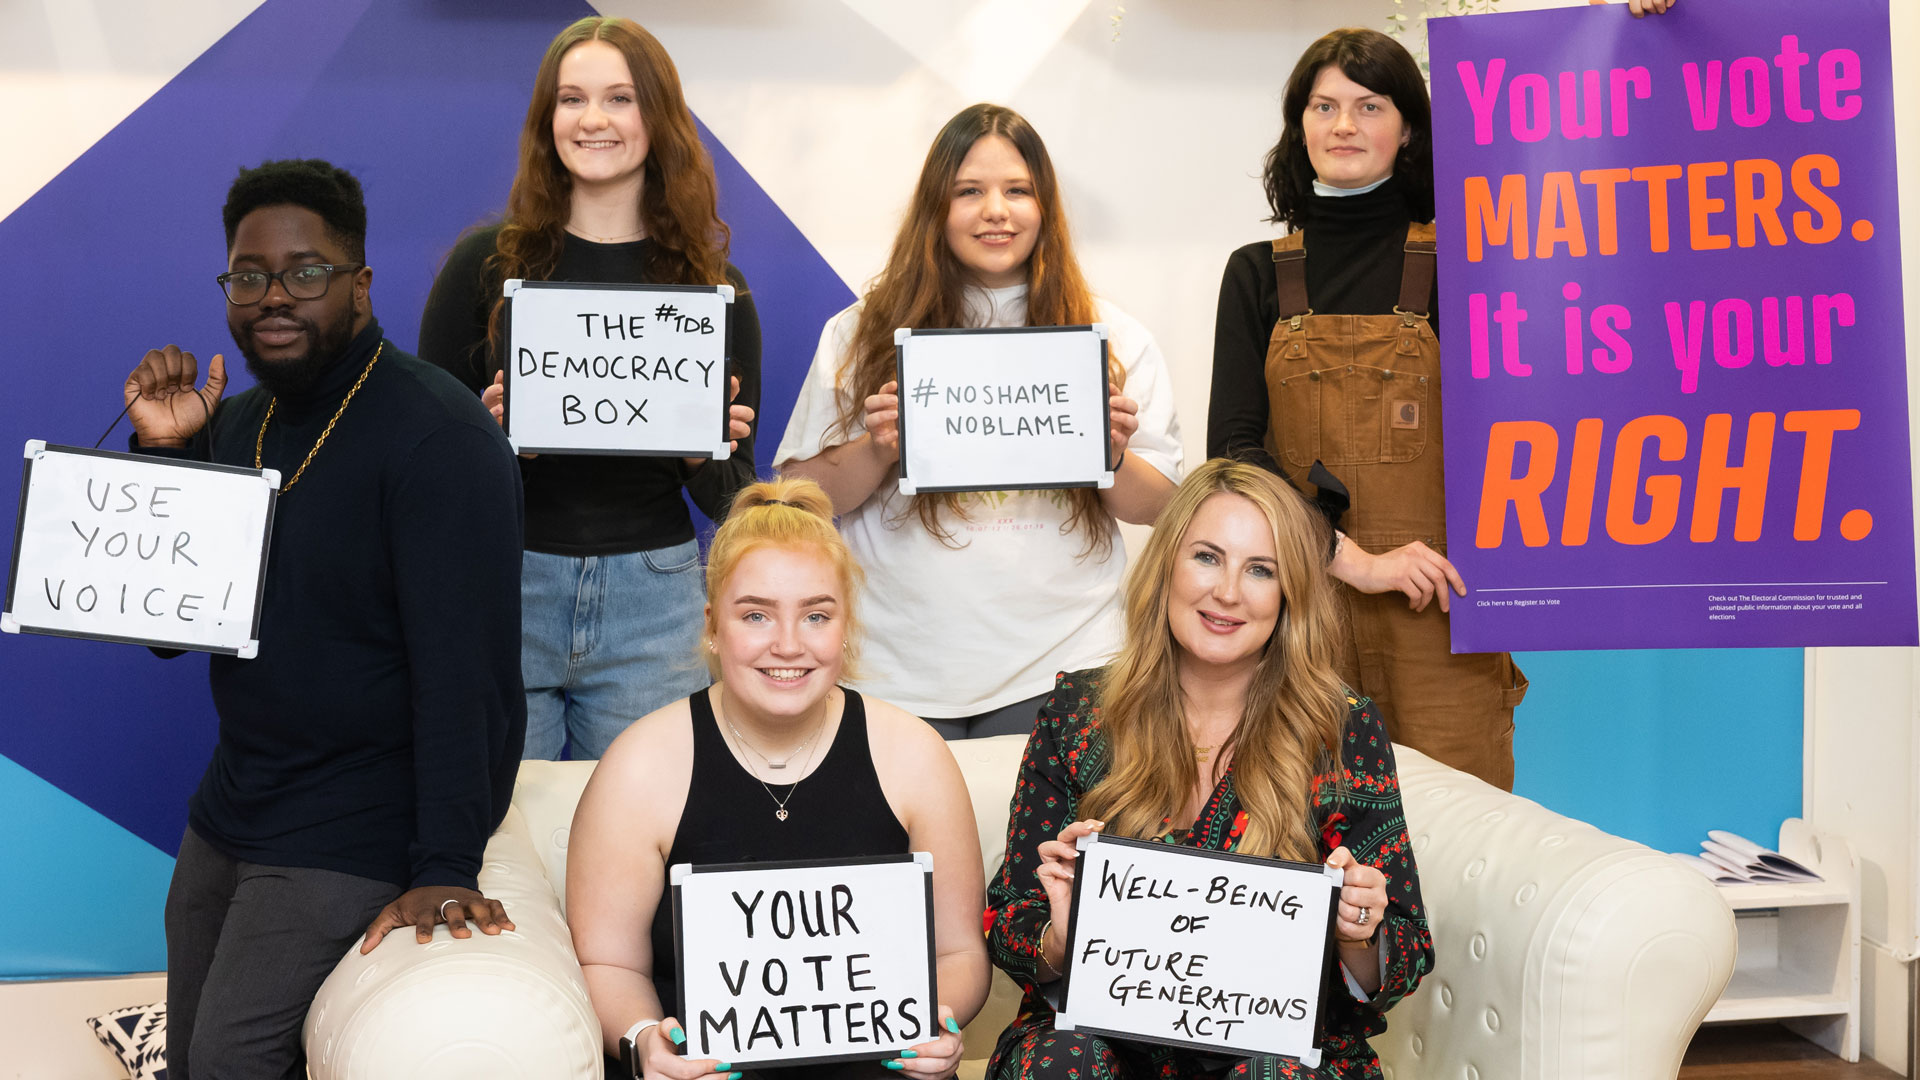 The Democracy Box's Josh White (Blank Face); Lola Evans; Katherine Rees; Tess Honorwood; Emily Mae Jones; and Future Generations Commissioner for Wales, Sophie Howe, send a message ahead of the local elections